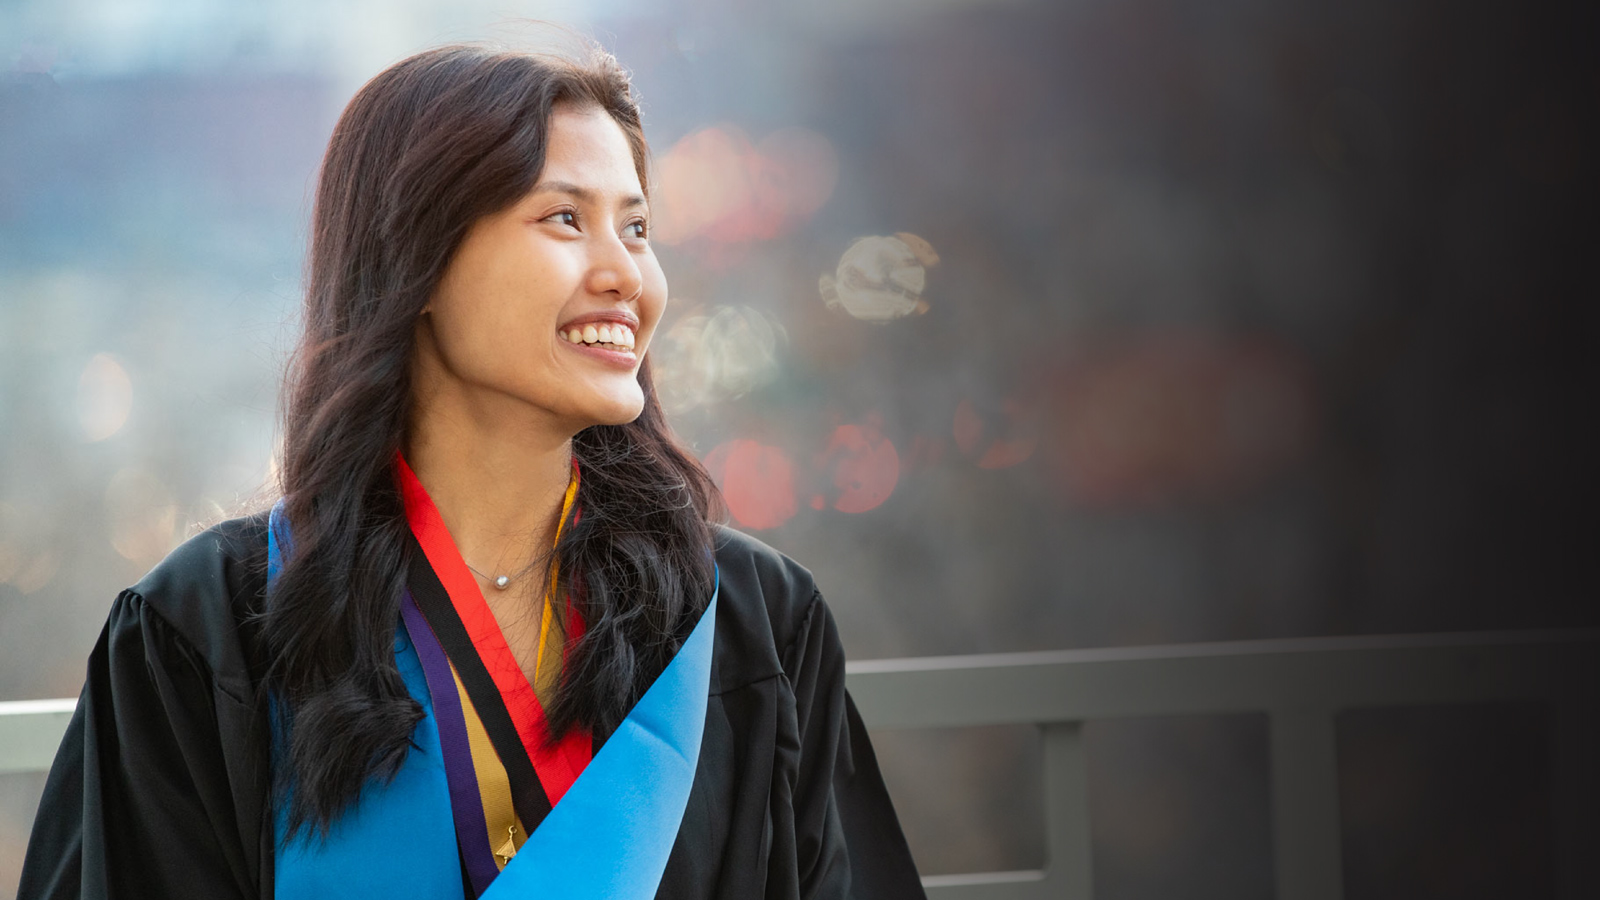 Student smiling in commencement attire